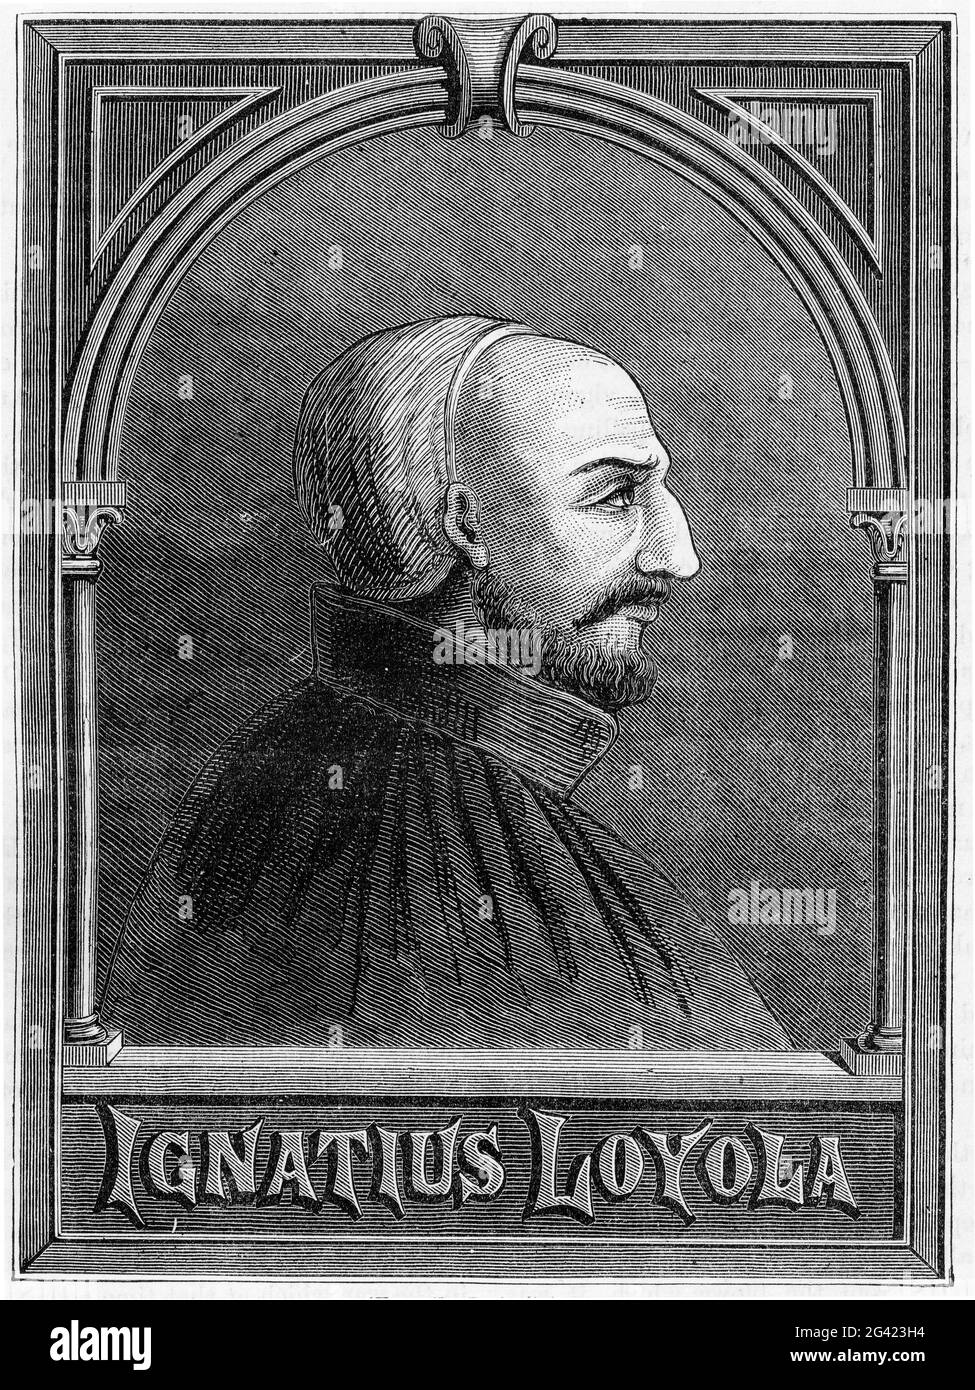 Engraving of Ignatius Loyola, founder of the military roman catholic order, the Society of Jesus, normally known as Jesuits Stock Photo